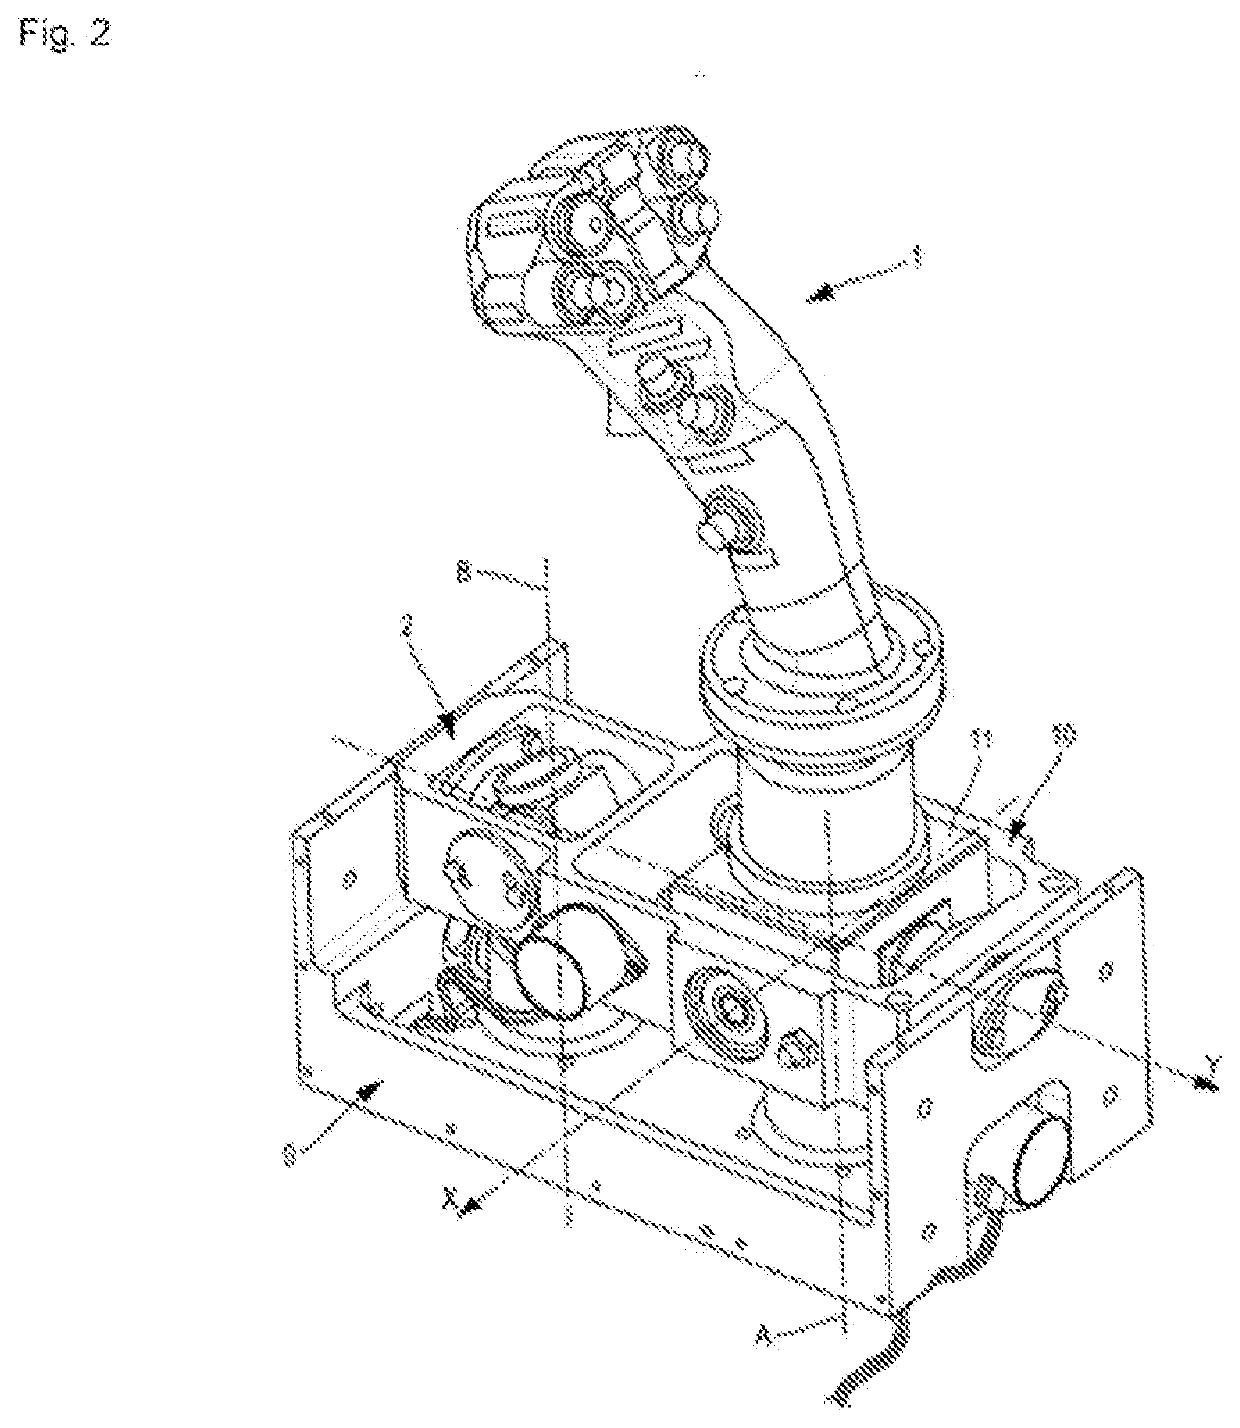 Force application device for an aircraft control stick